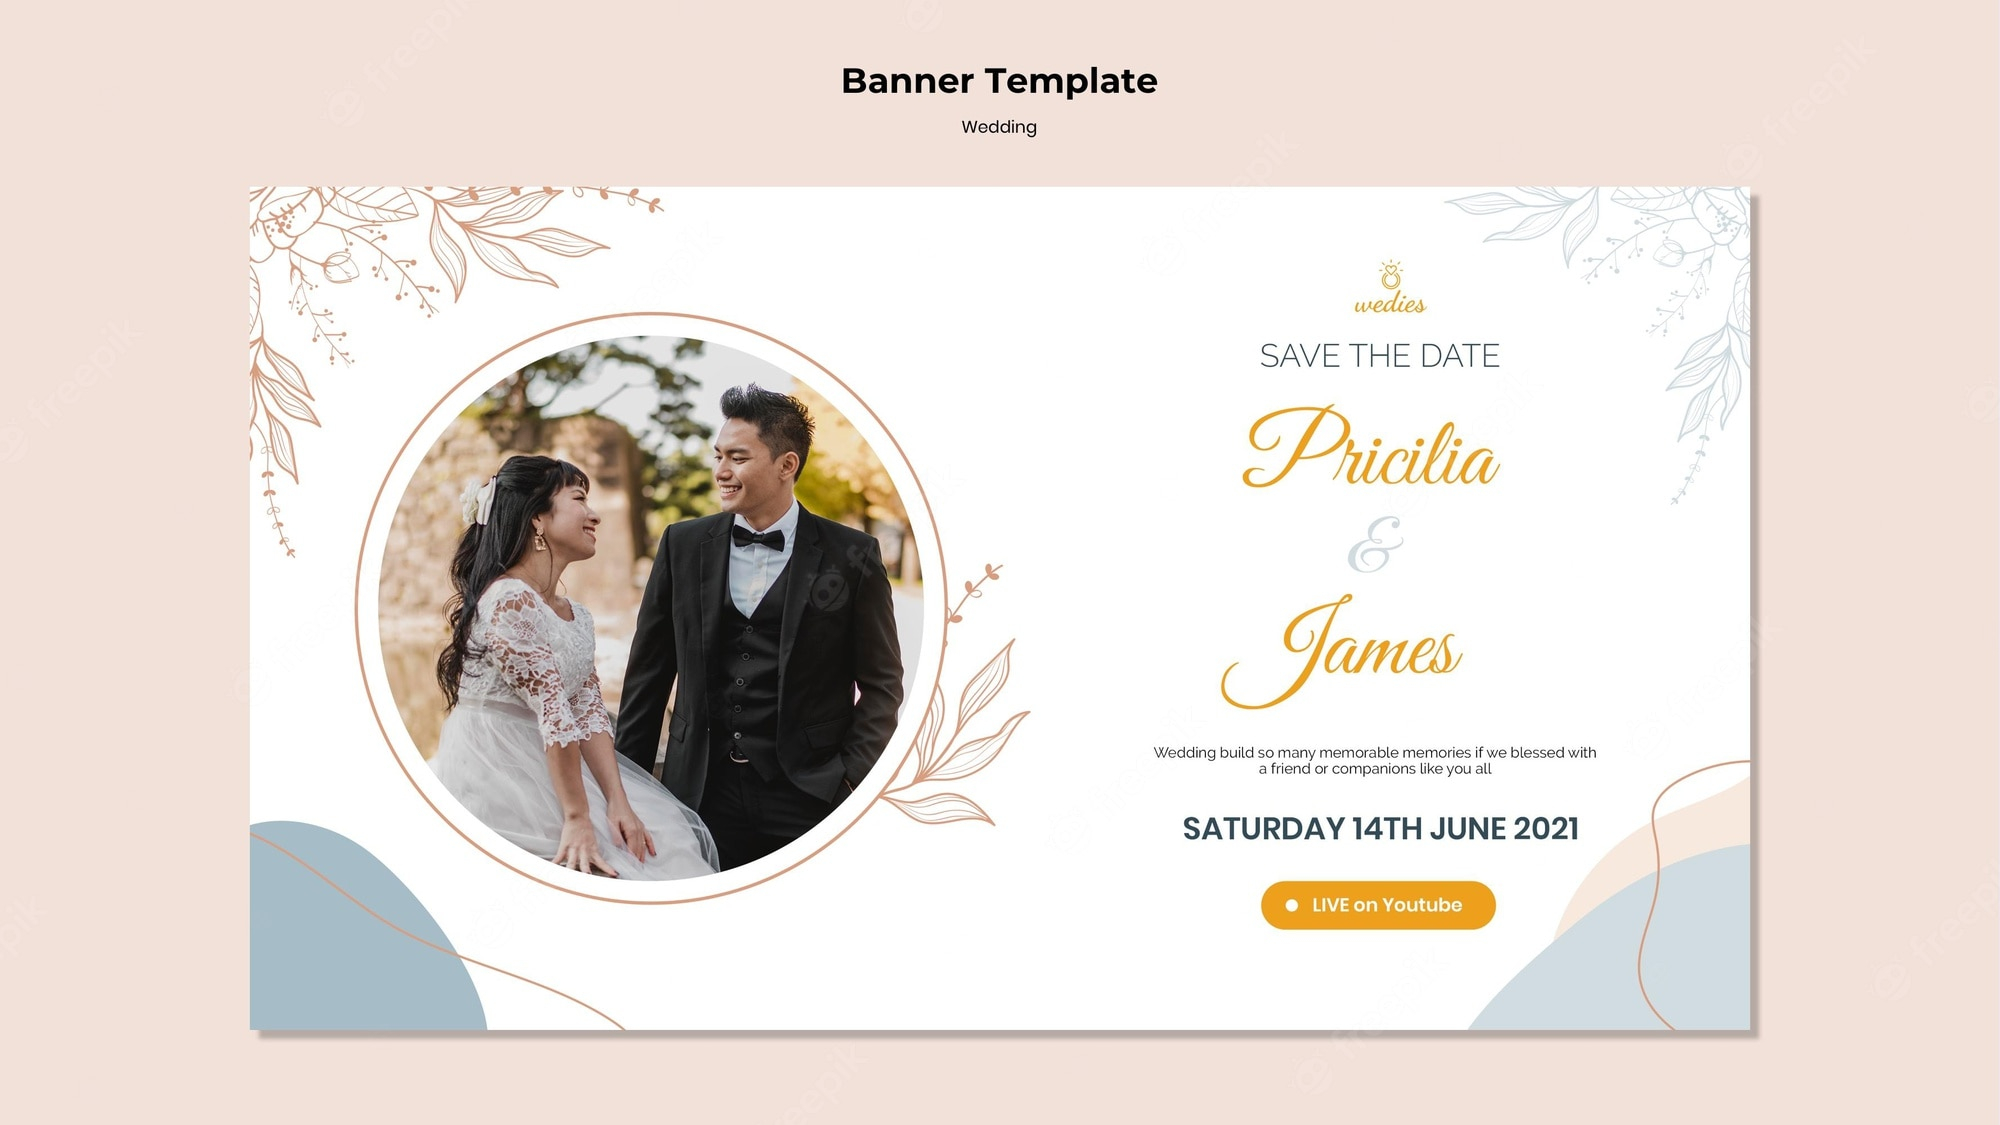 Free PSD  Banner template for wedding ceremony with bride and groom In Bride To Be Banner Template